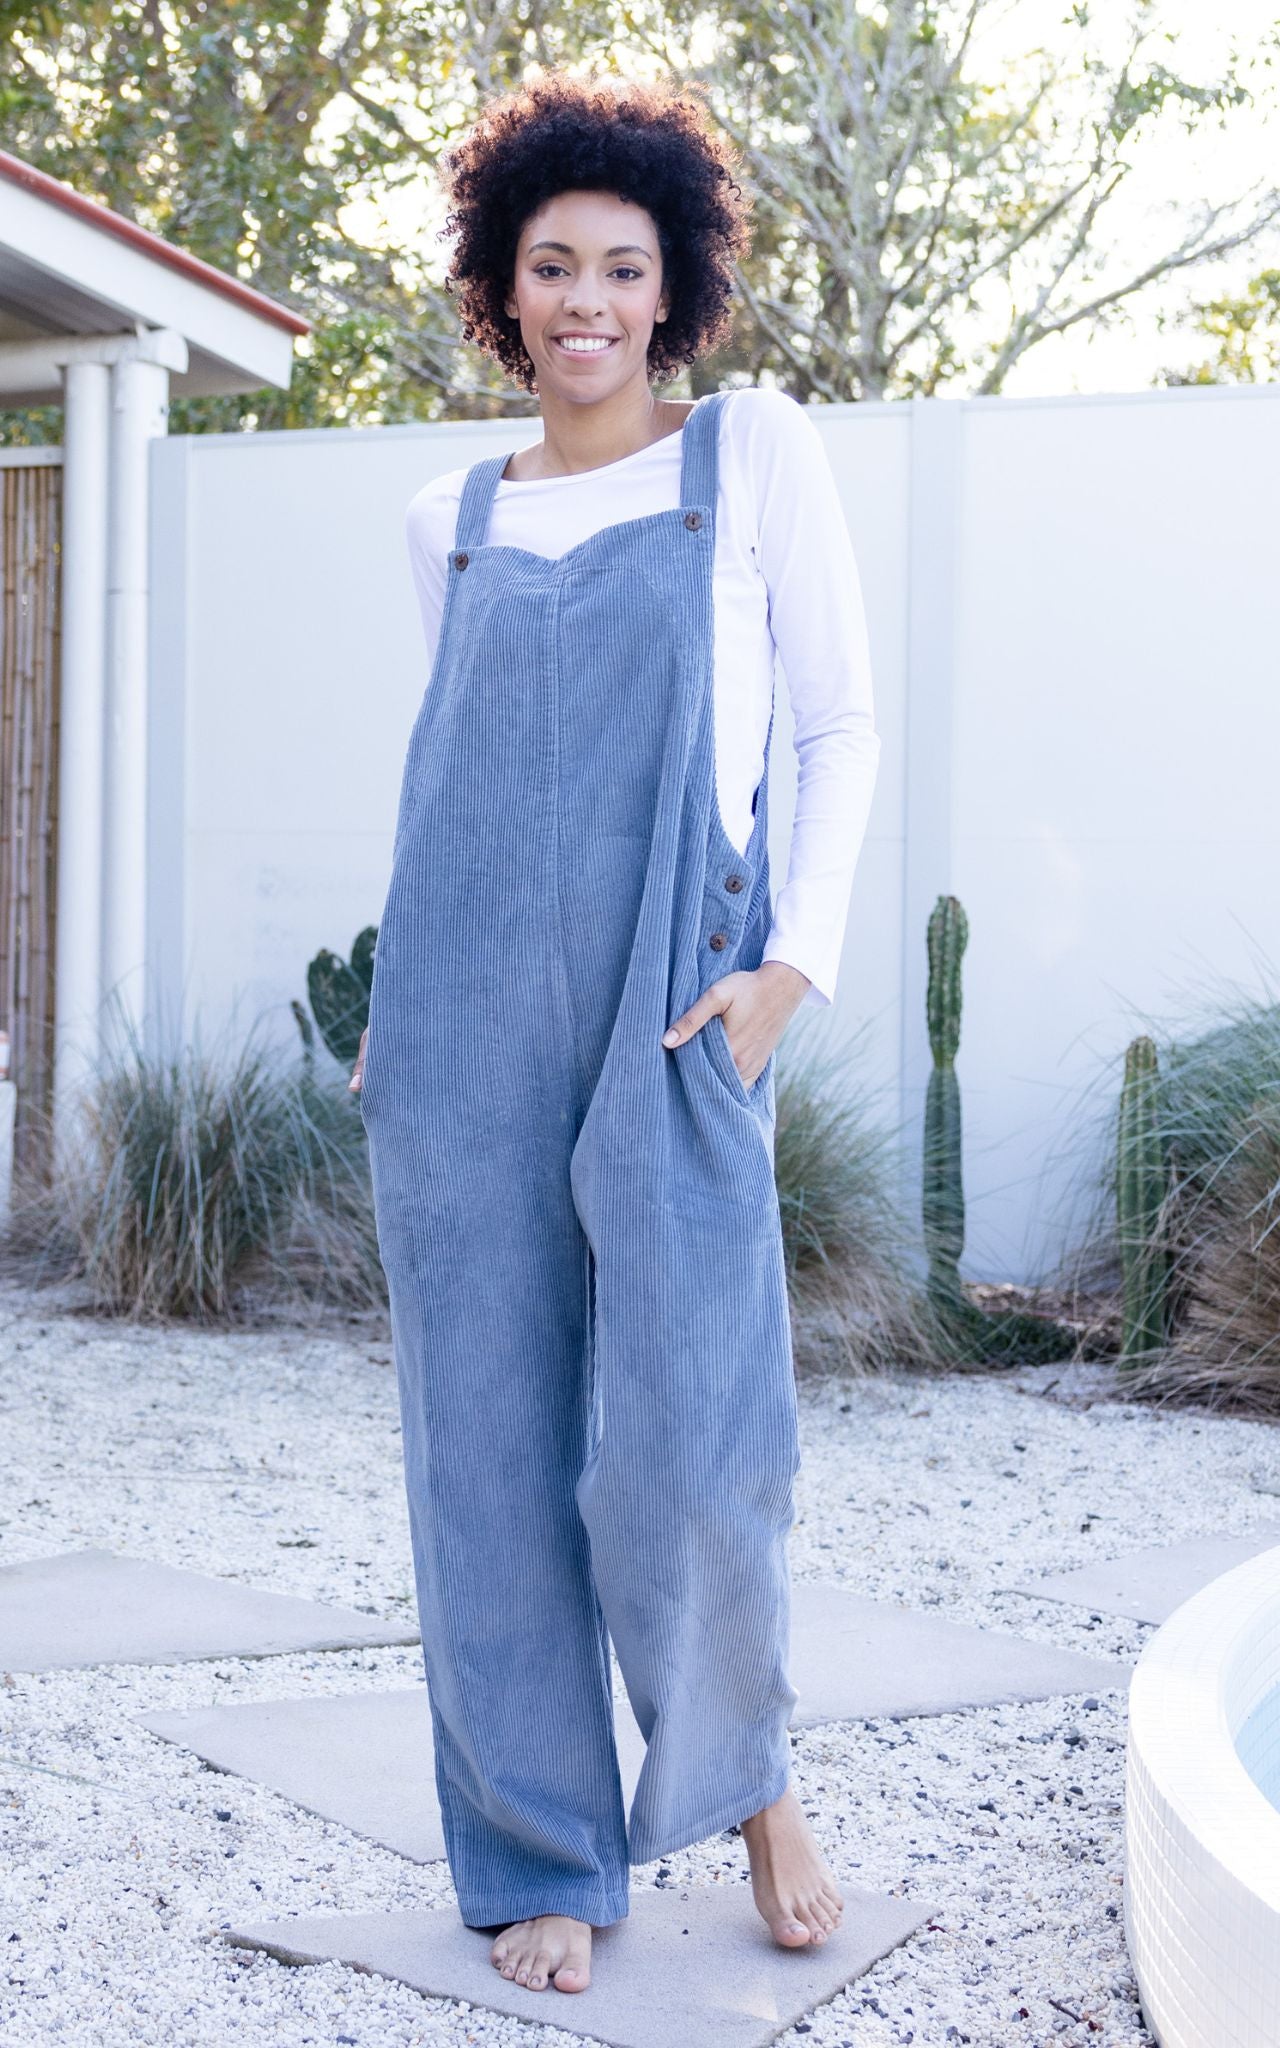 Denim Linen Dungarees | Made in Australia | Ethical Womenswear by Frske